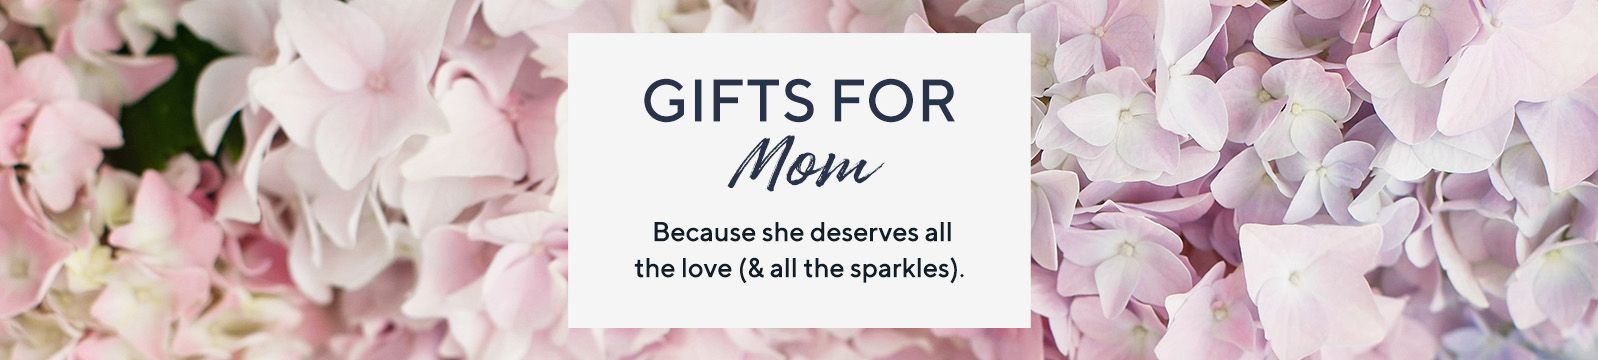 Gifts for Mom. Because she deserves all the love (and all the sparkles).  